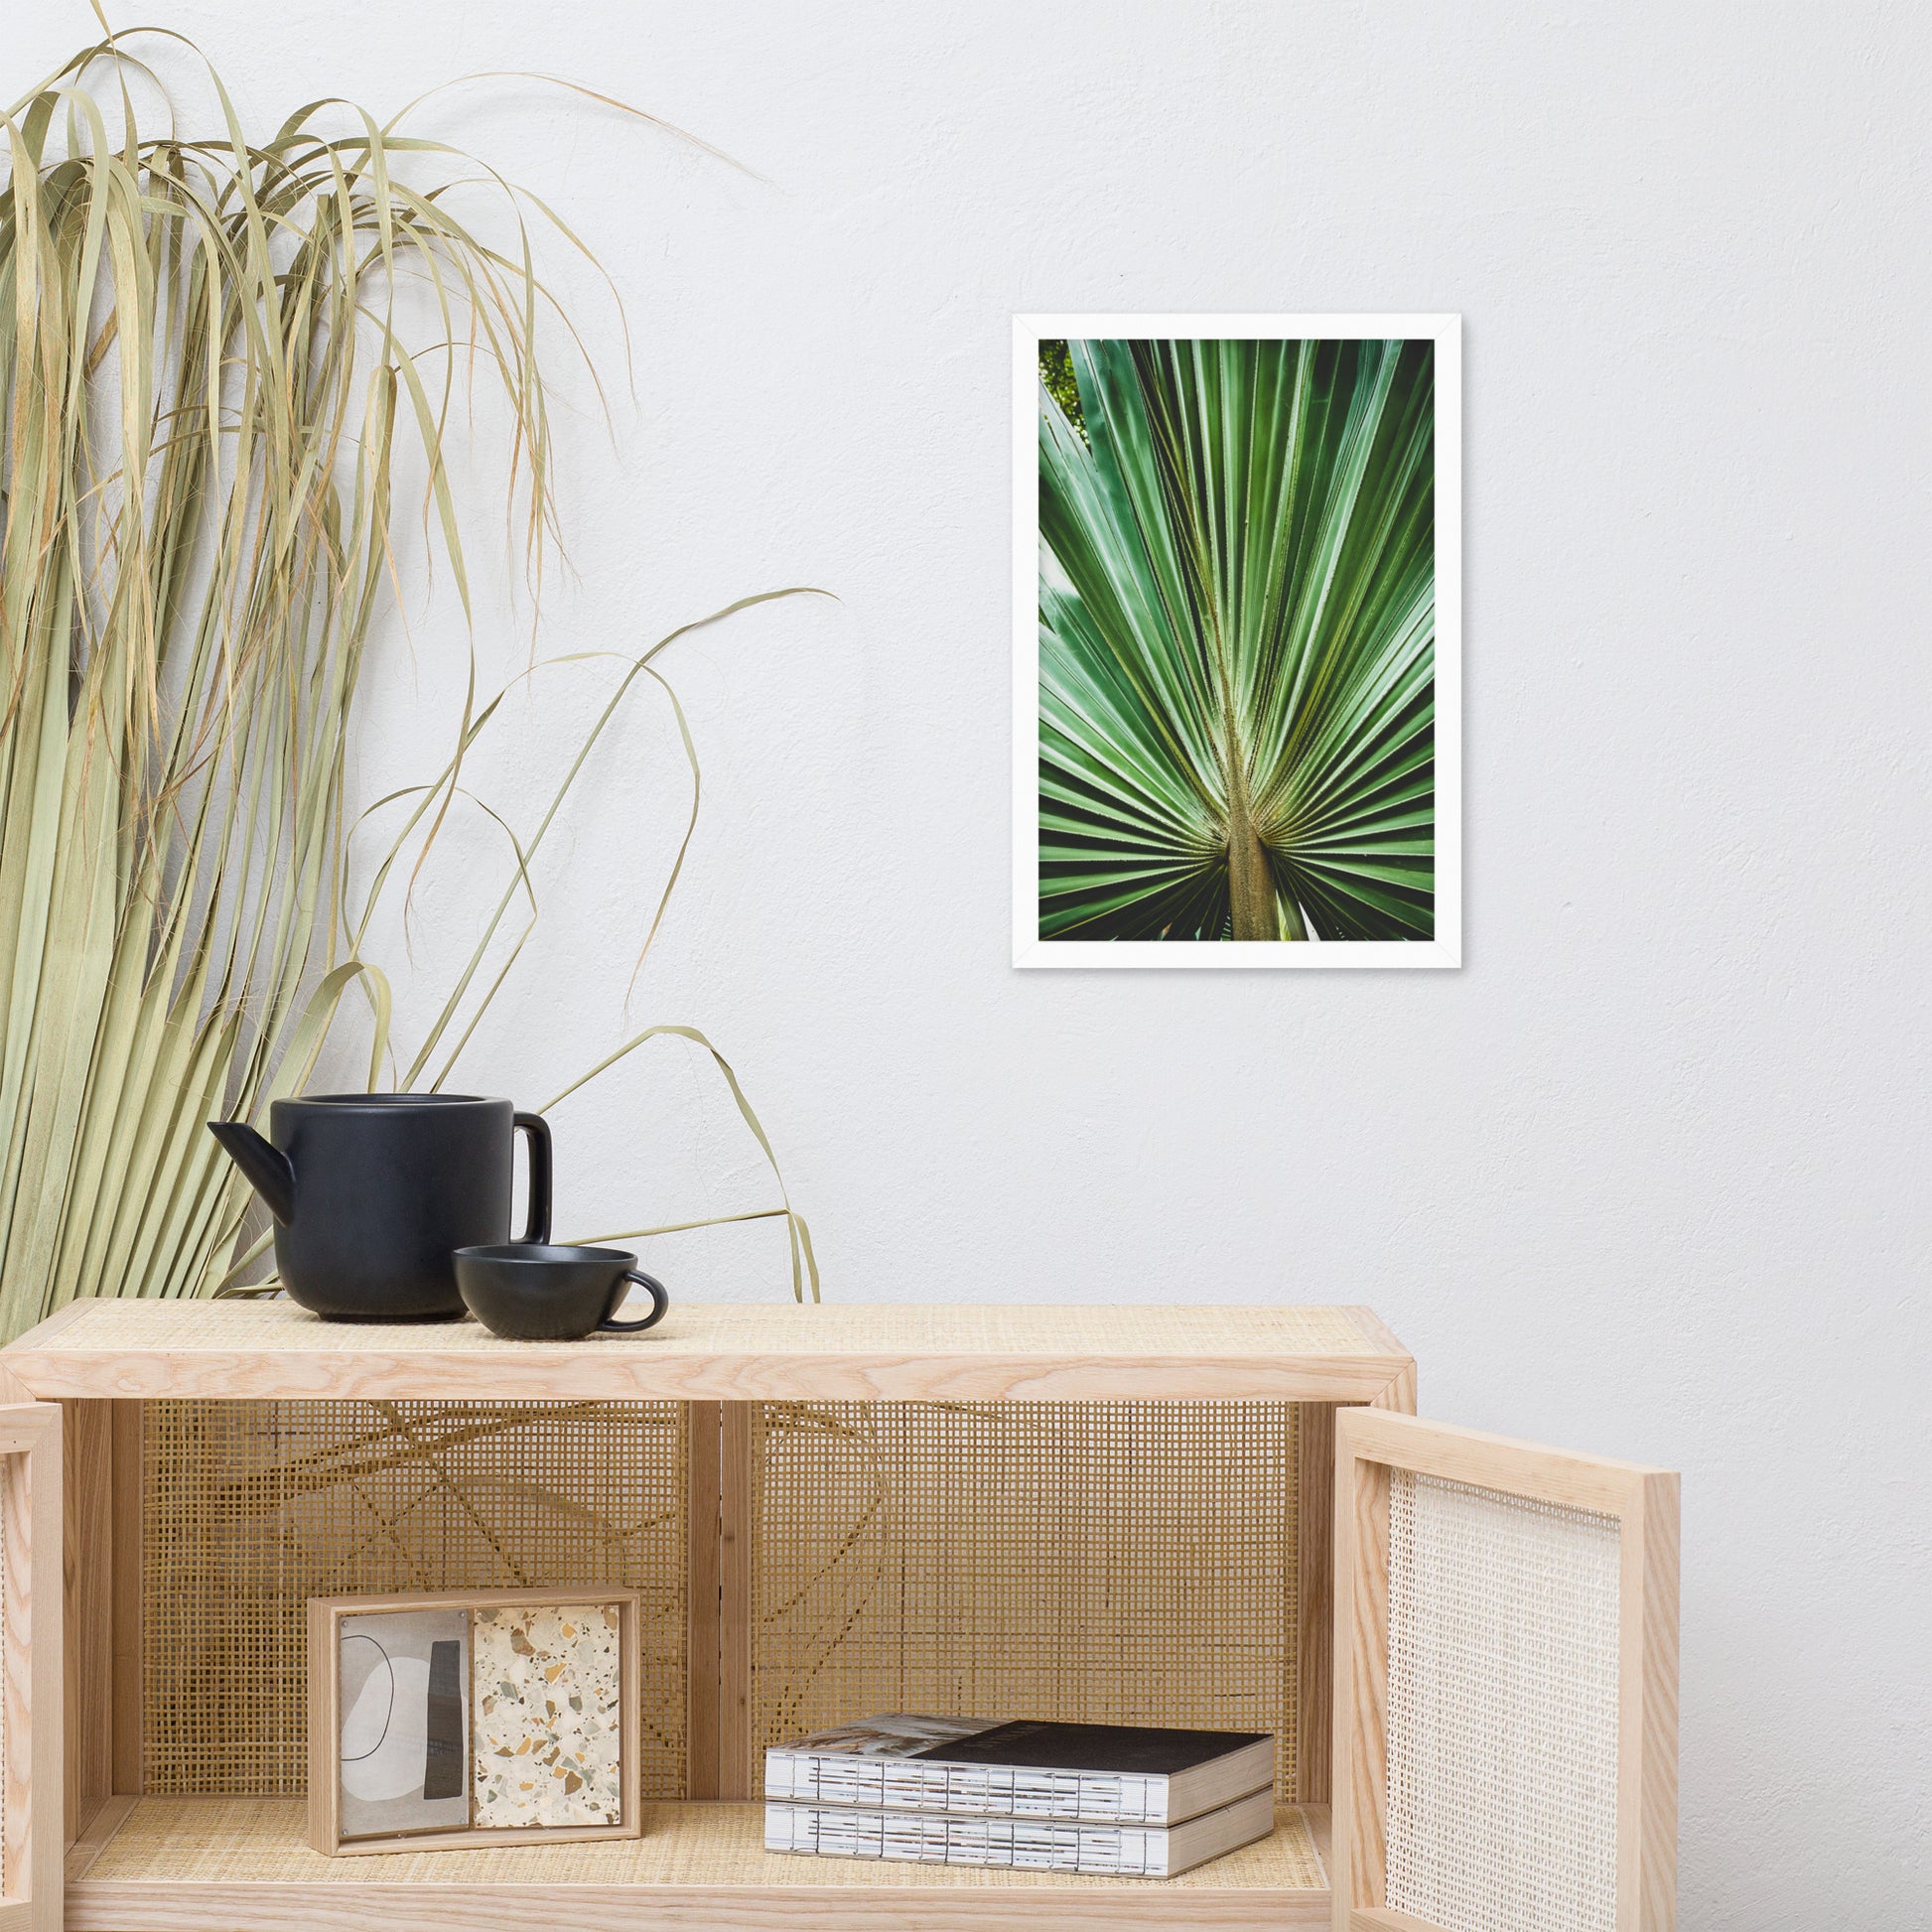 Rustic Farmhouse Dining Room Wall Decor: Aged and Colorized Wide Palm Leaves 2 Tropical Botanical / Nature Photo Framed Wall Art Print - Artwork - Wall Decor